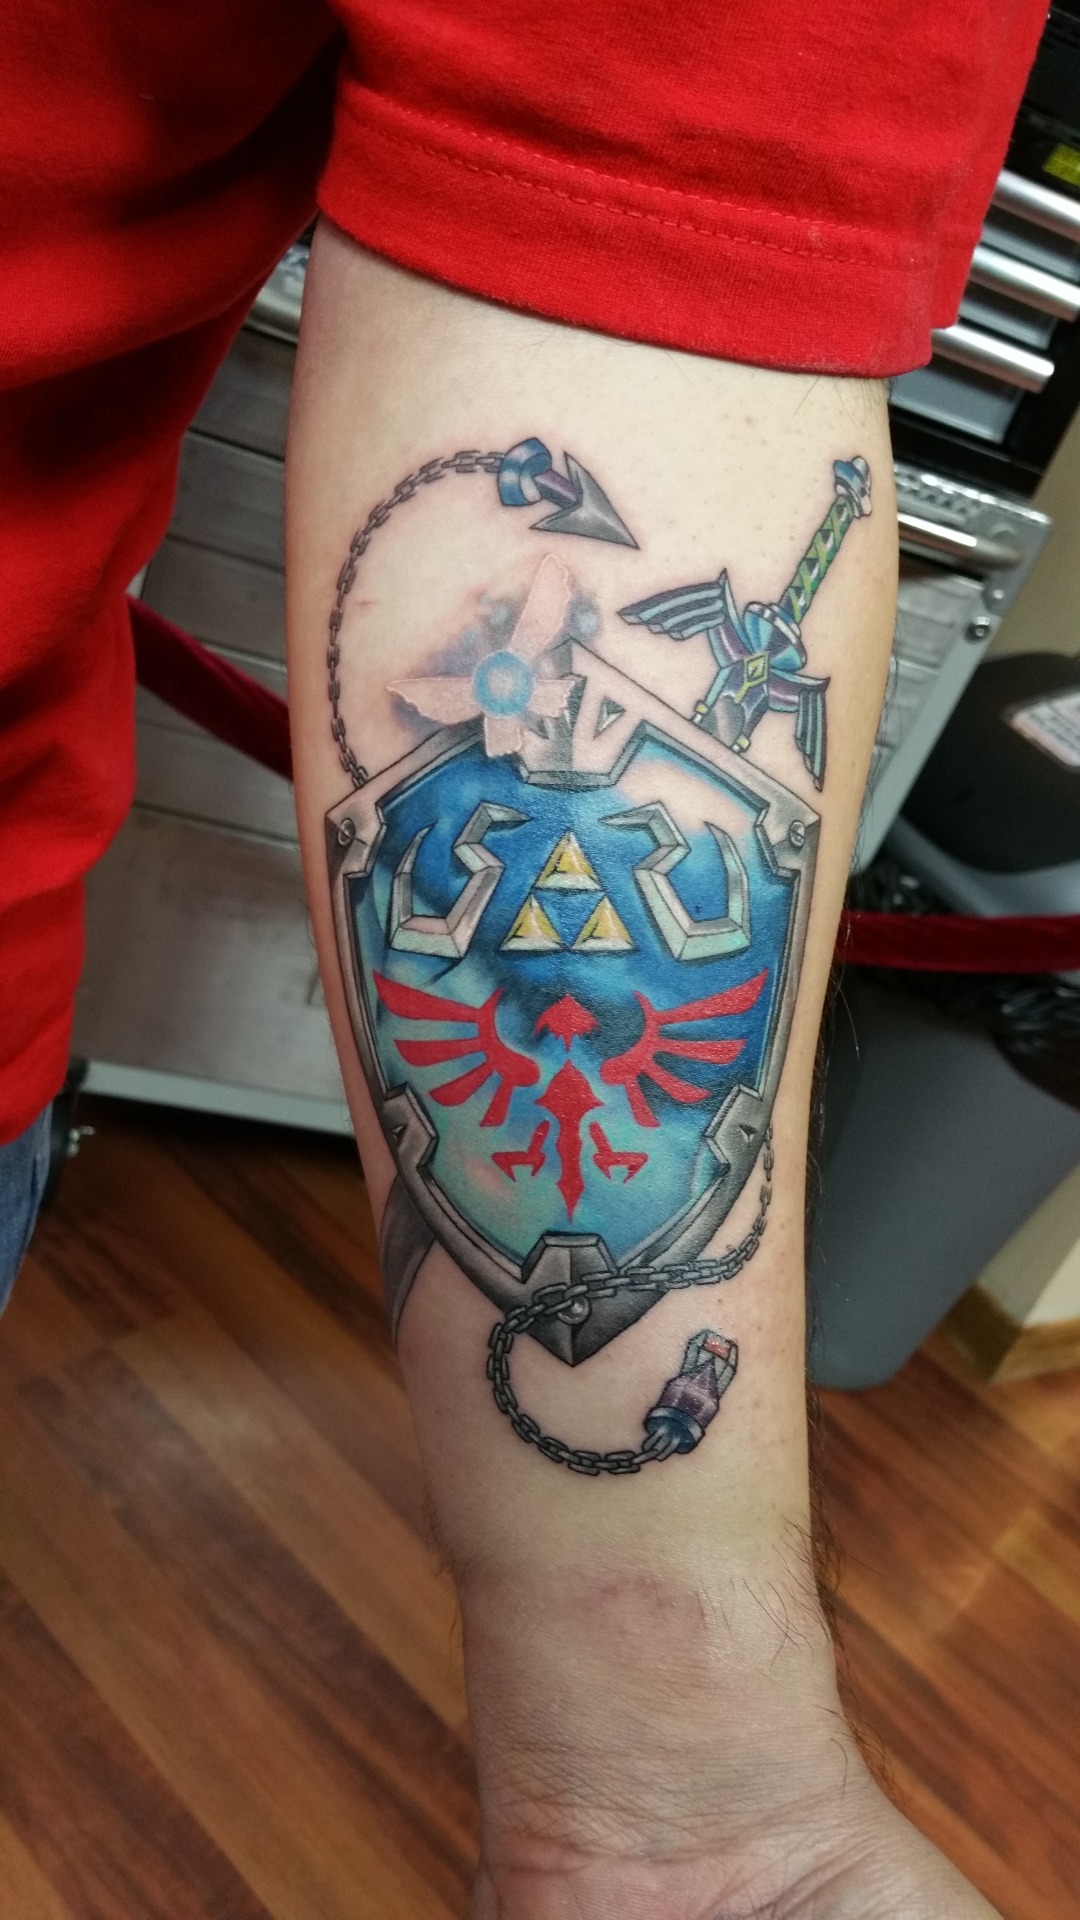 Amax Web Design on Twitter People say i should post here Check out my  Black Hylian Shield Tattoo tattoo httpstcoVHn3VgH1ec  Twitter